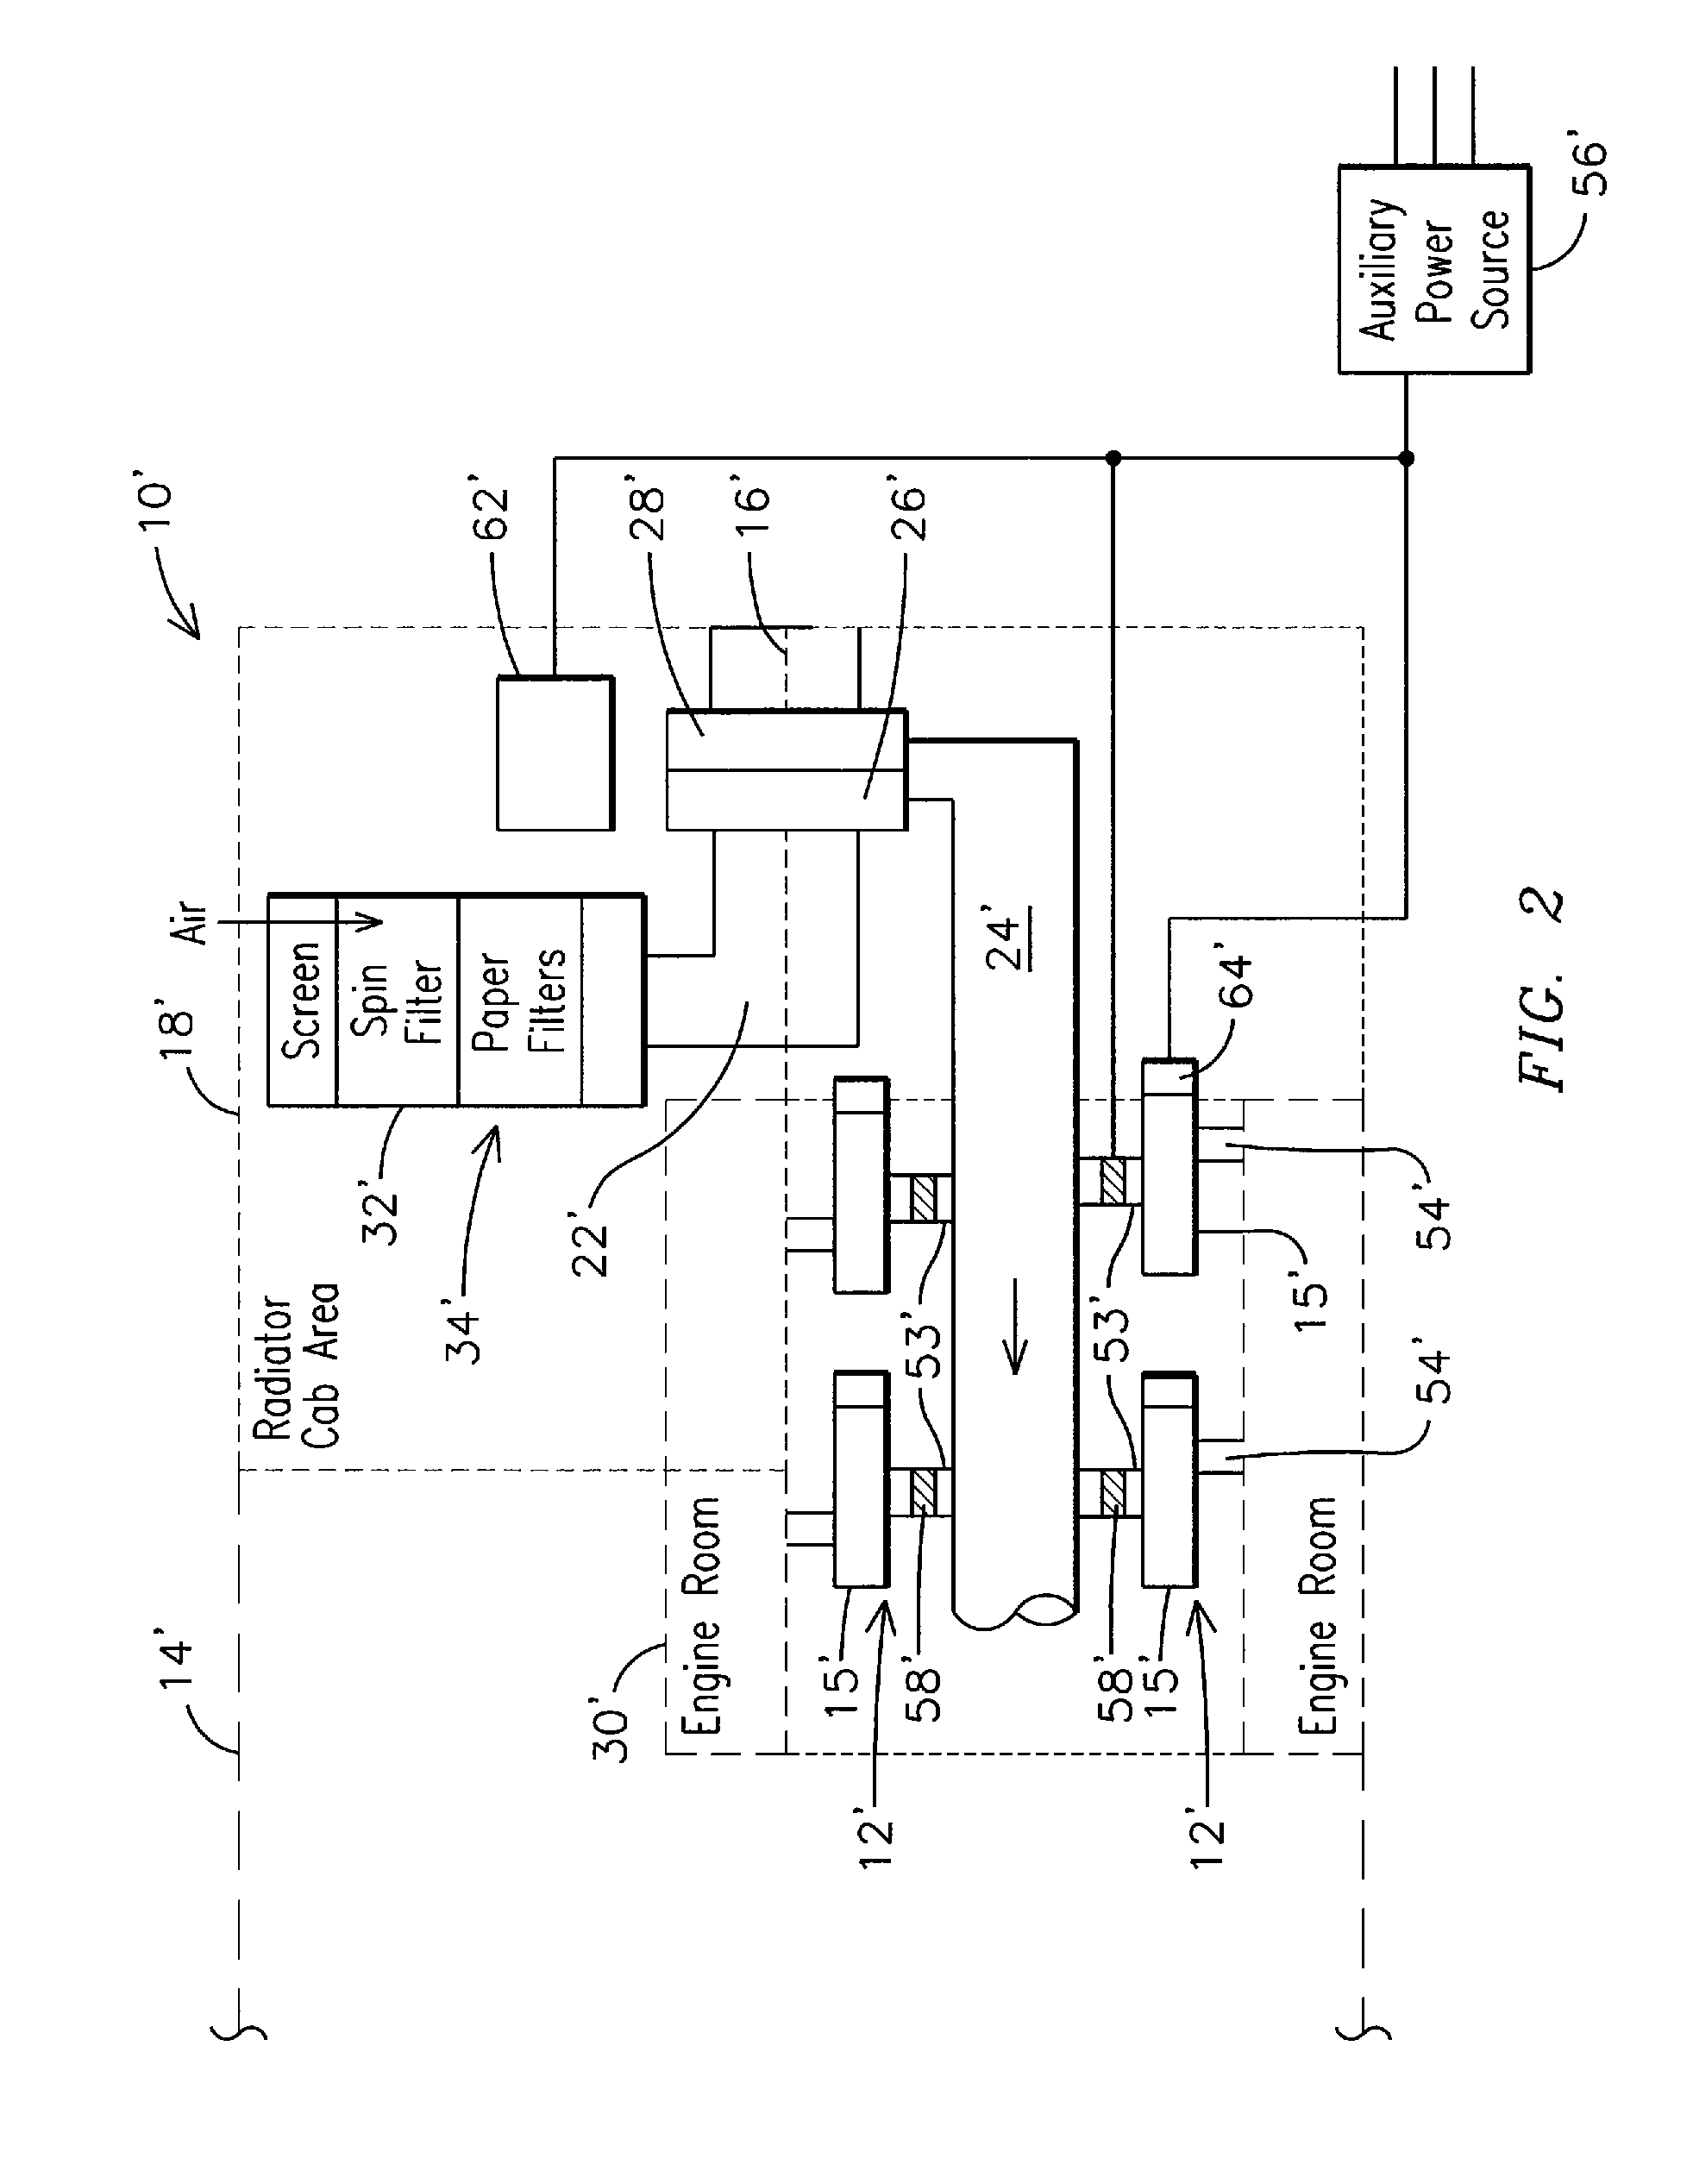 System and method for segregating an energy storage system from piping and cabling on a hybrid energy vehicle